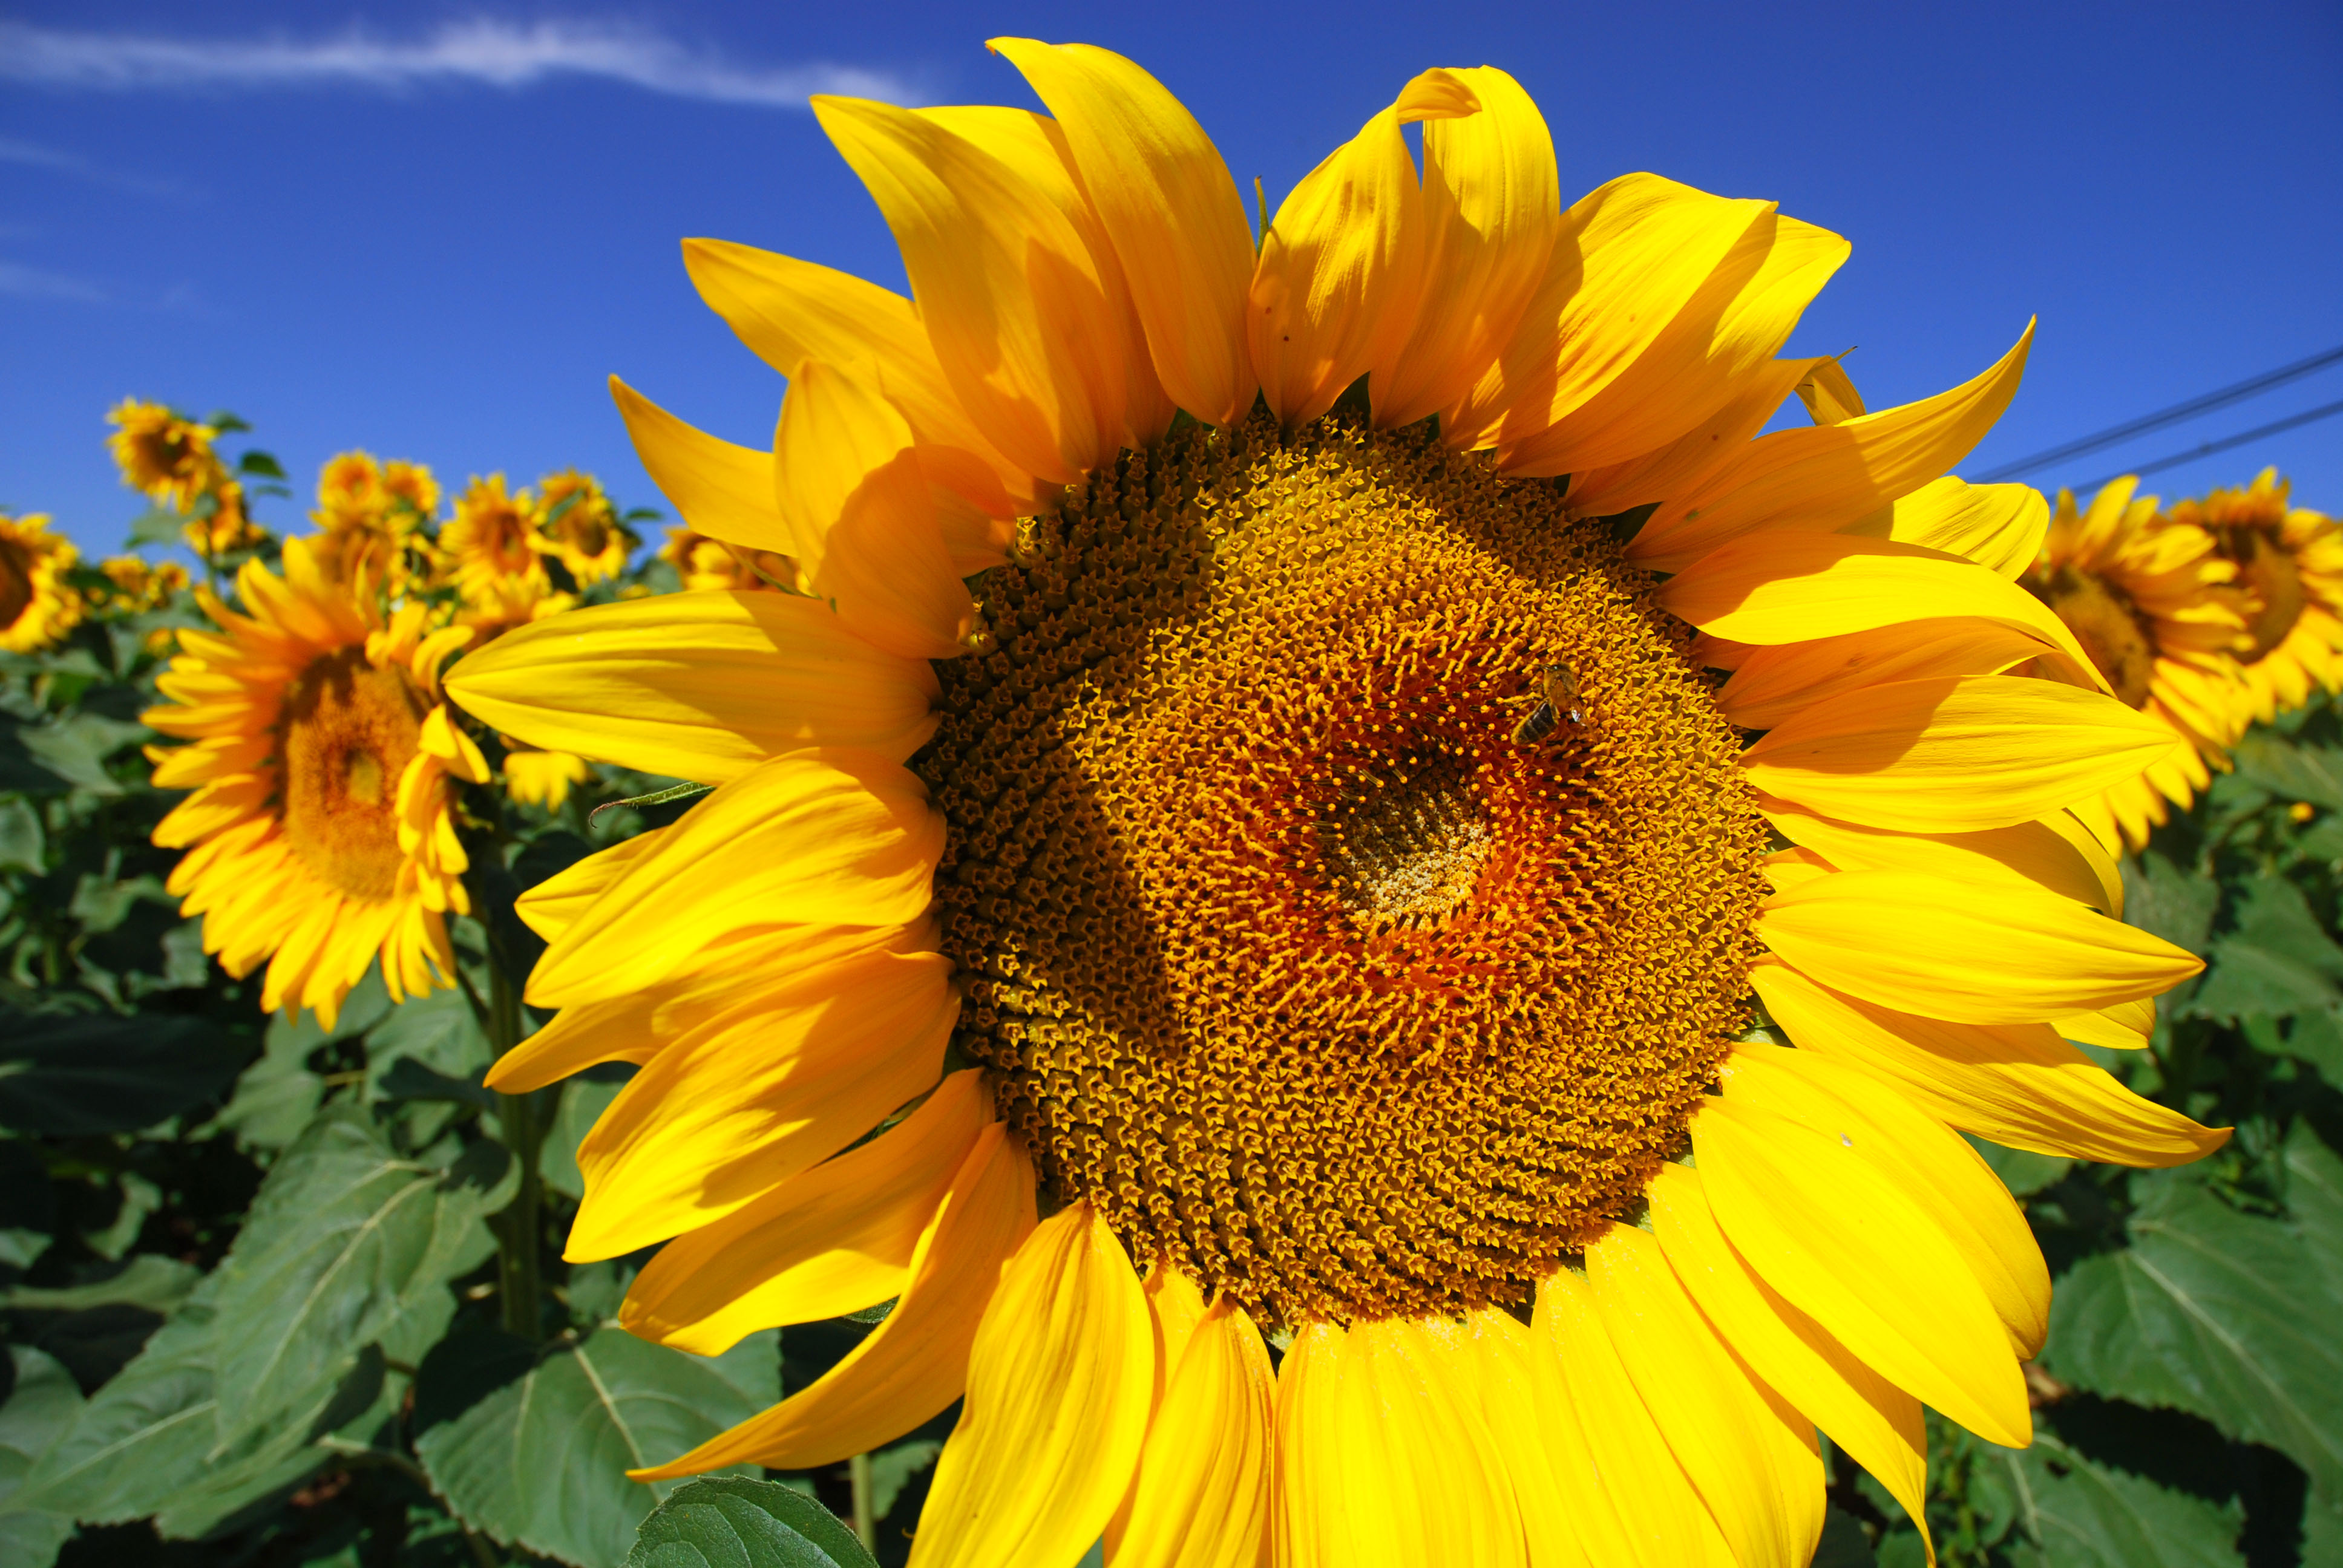 image Of Sunflowers, HD Sunflowers Wallpaper and Photo. View